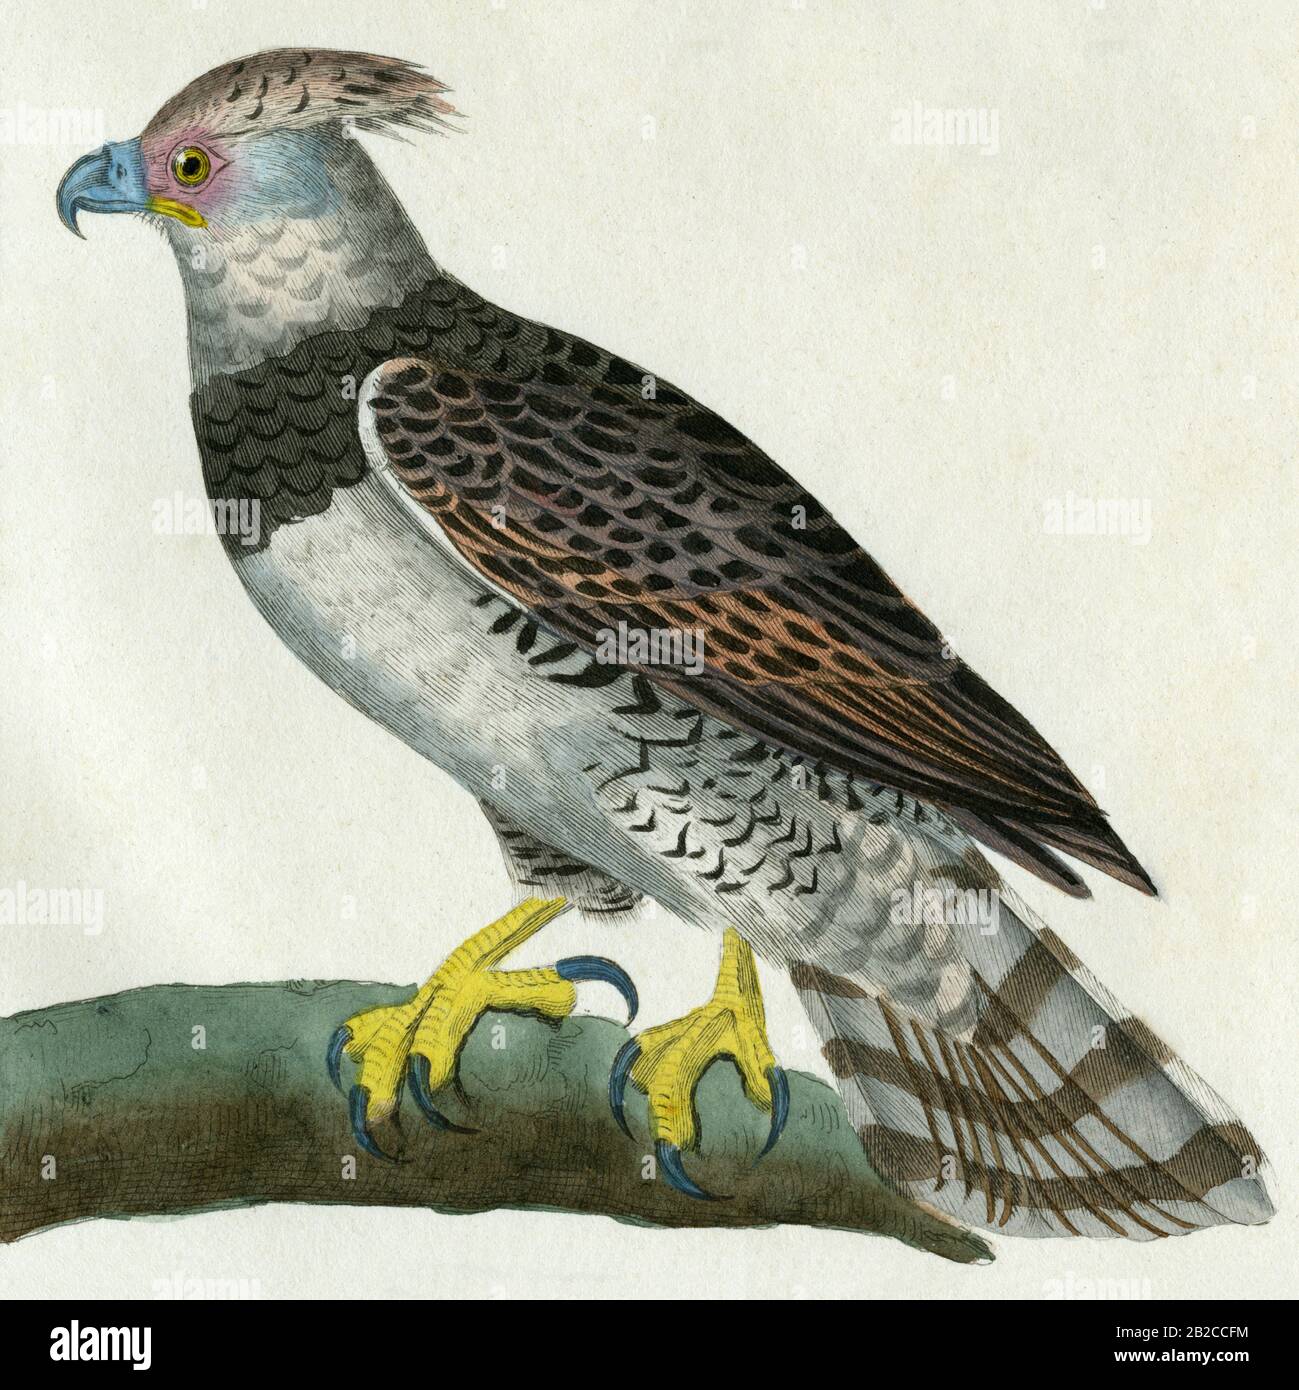 Eagle or aigle with yellow claws and stepped tail.  Detail of an engraving created in the 1800s for the “Oeuvres complètes de Buffon, augmentées par M.F. Cuvier”, published in 29 volumes from 1829 to 1832.  This “Complete works” brought the previous century's influential writings by Georges-Louis Leclerc, Comte de Buffon (1707-1788), on natural history and science to new generations.  The engraving in this image was created from a drawing by Madame C. Pillot, wife of Paris-based publisher of the “Complete Works”, F D Pillot. Stock Photo